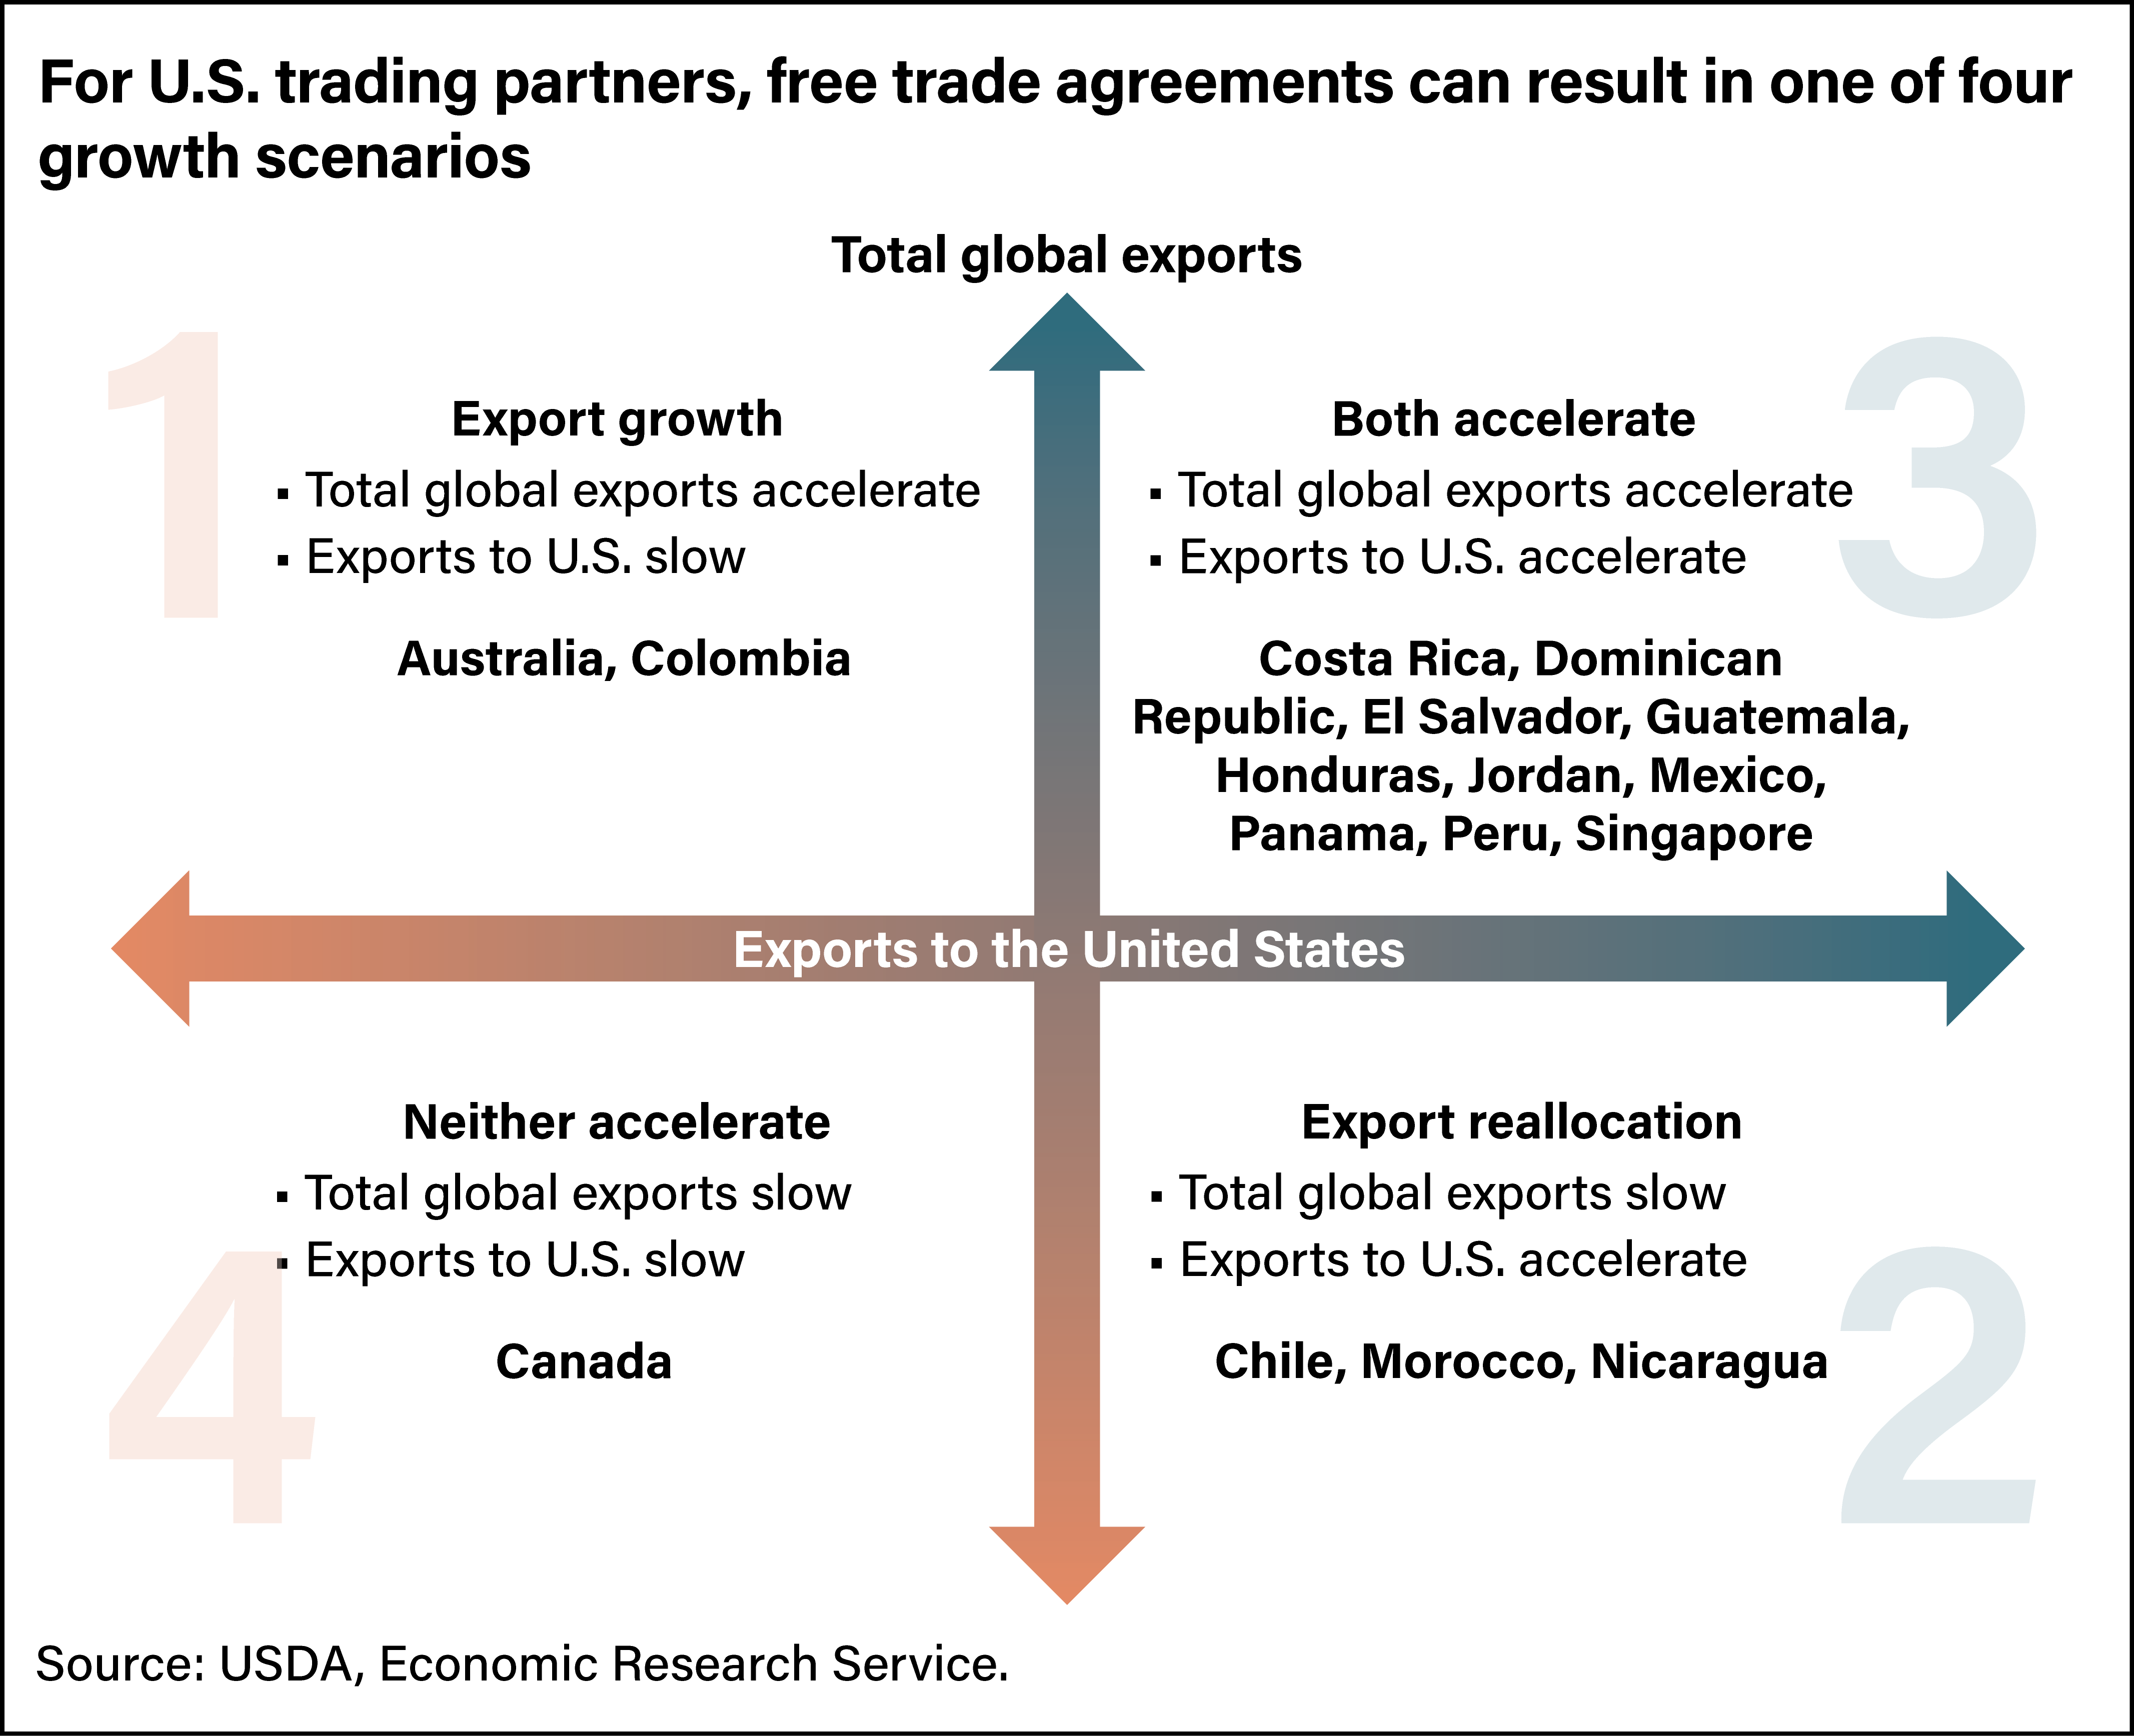 USDA ERS - Free Trade Agreements Mean Export Growth for Some Countries,  Reallocation of Trade for Others